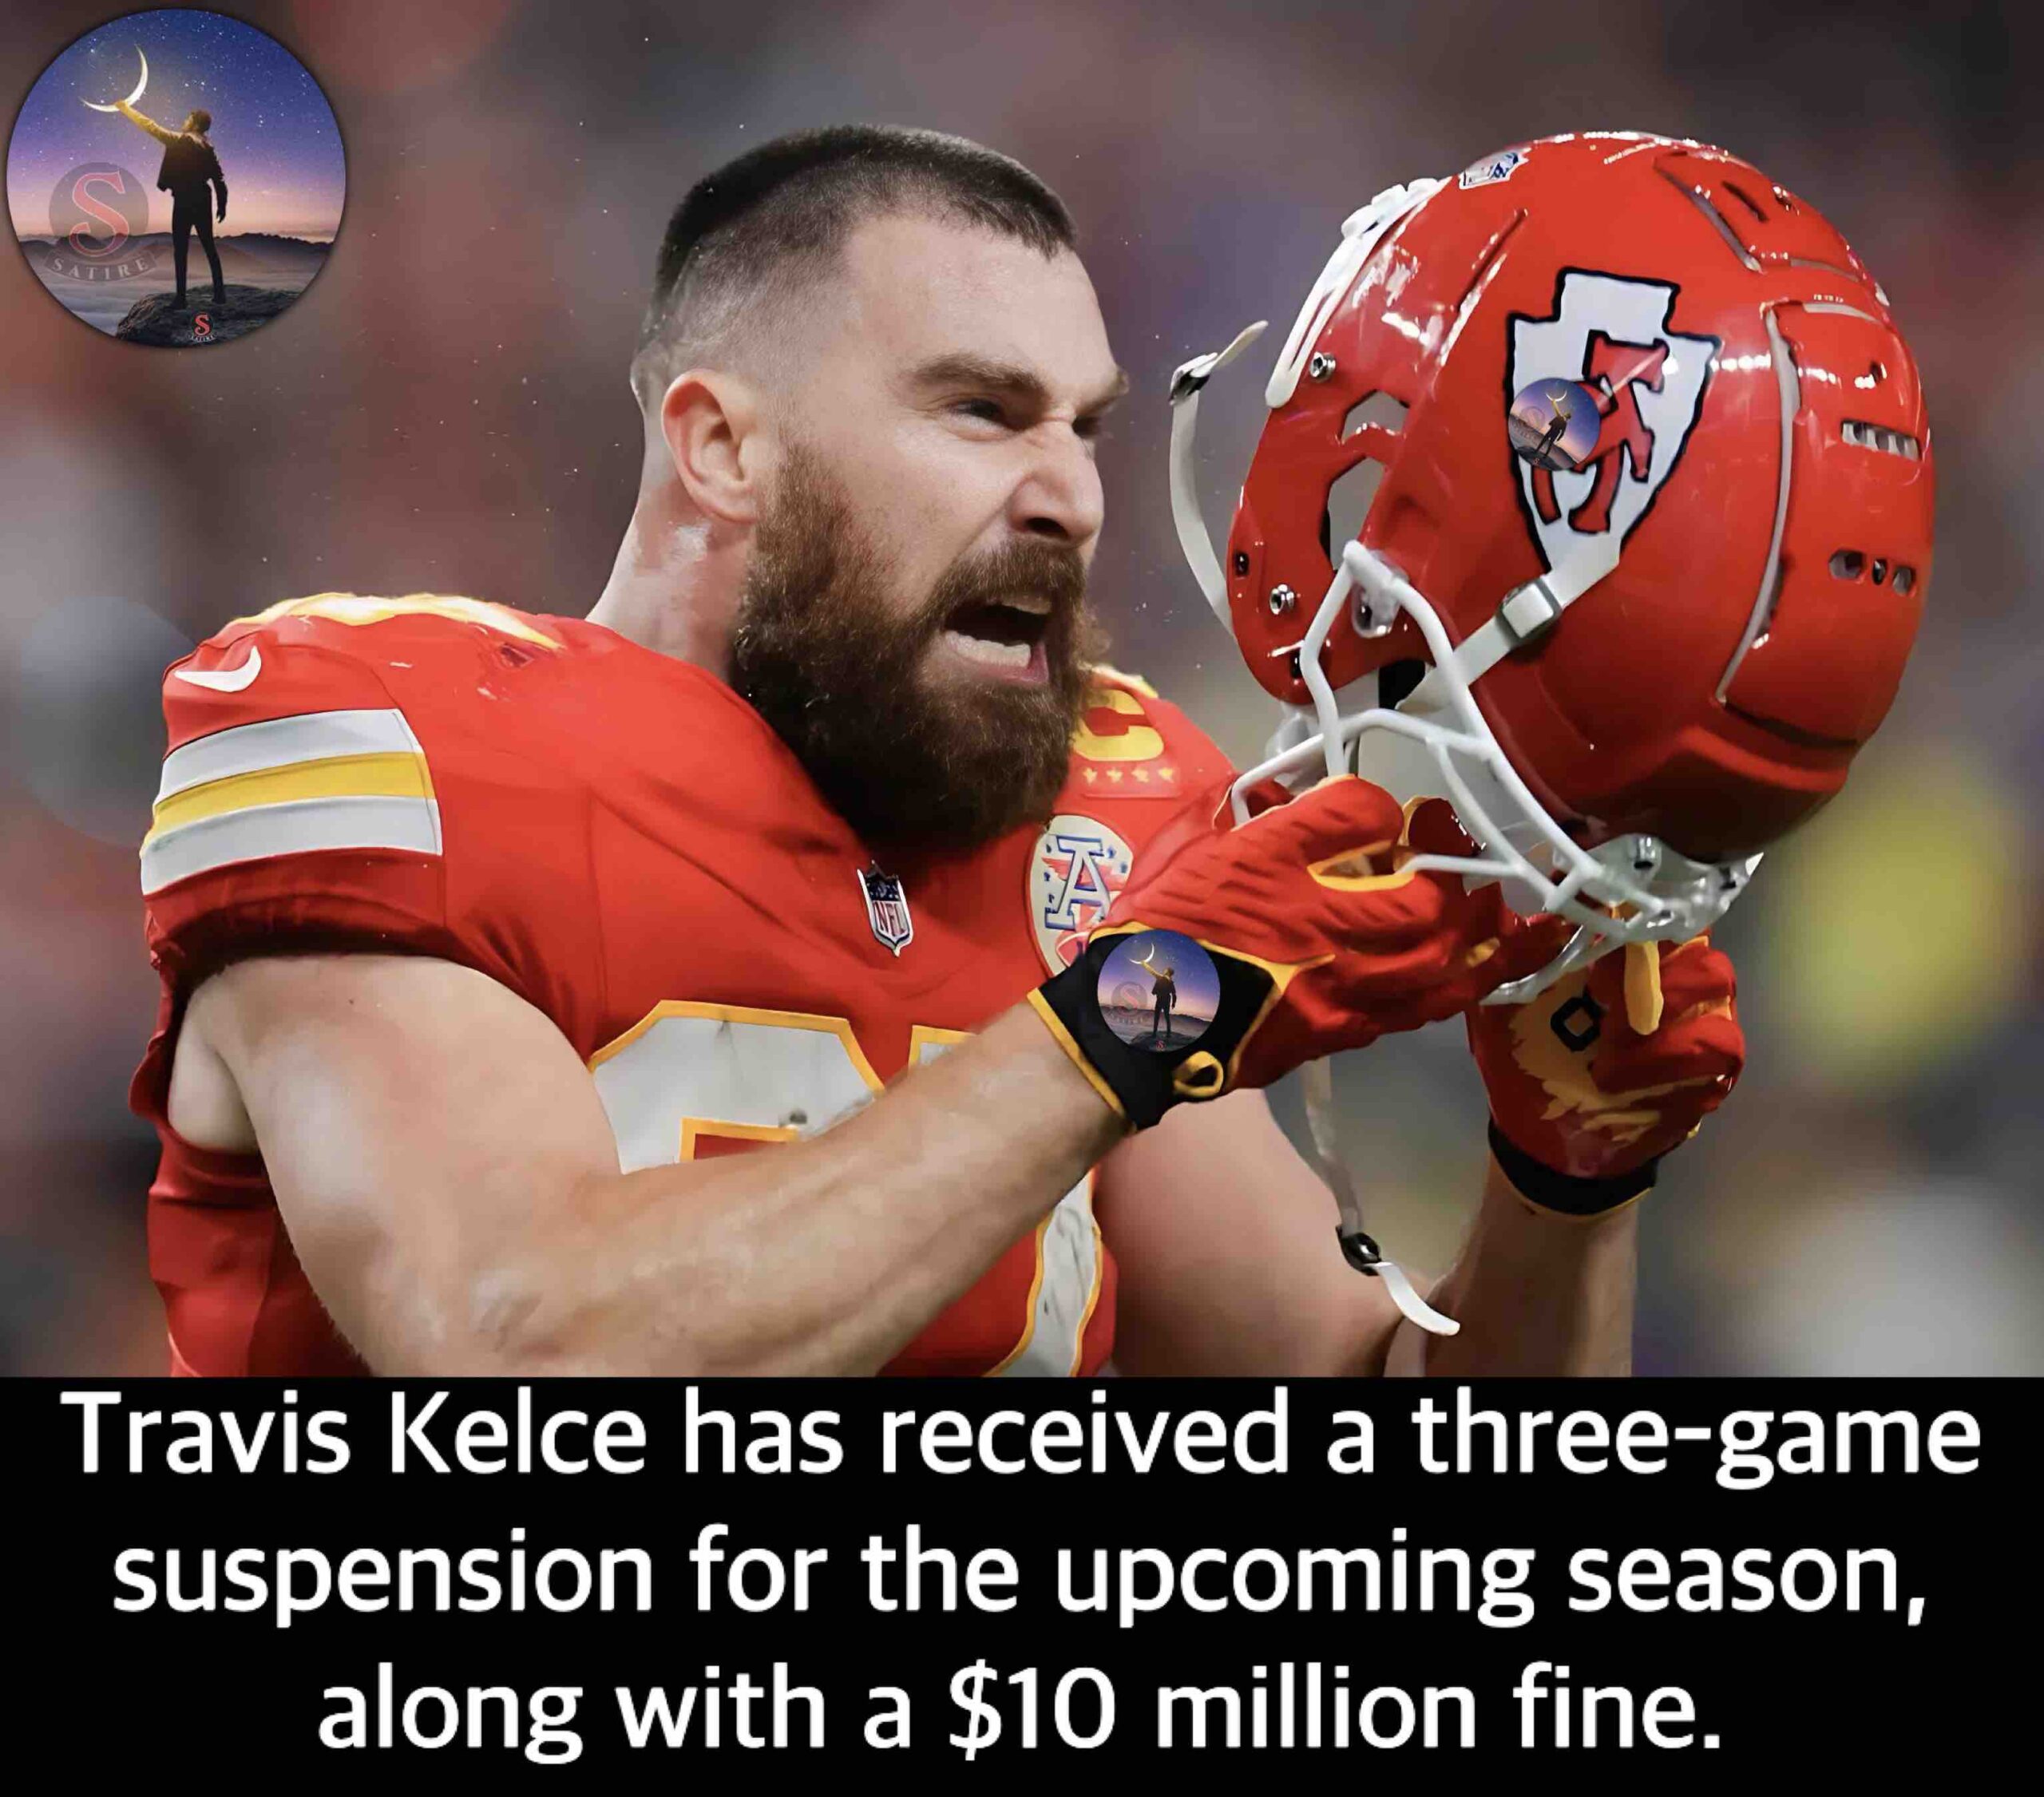 Travis Kelce has received a three-game suspension for the upcoming season, along with a $10 million fine.